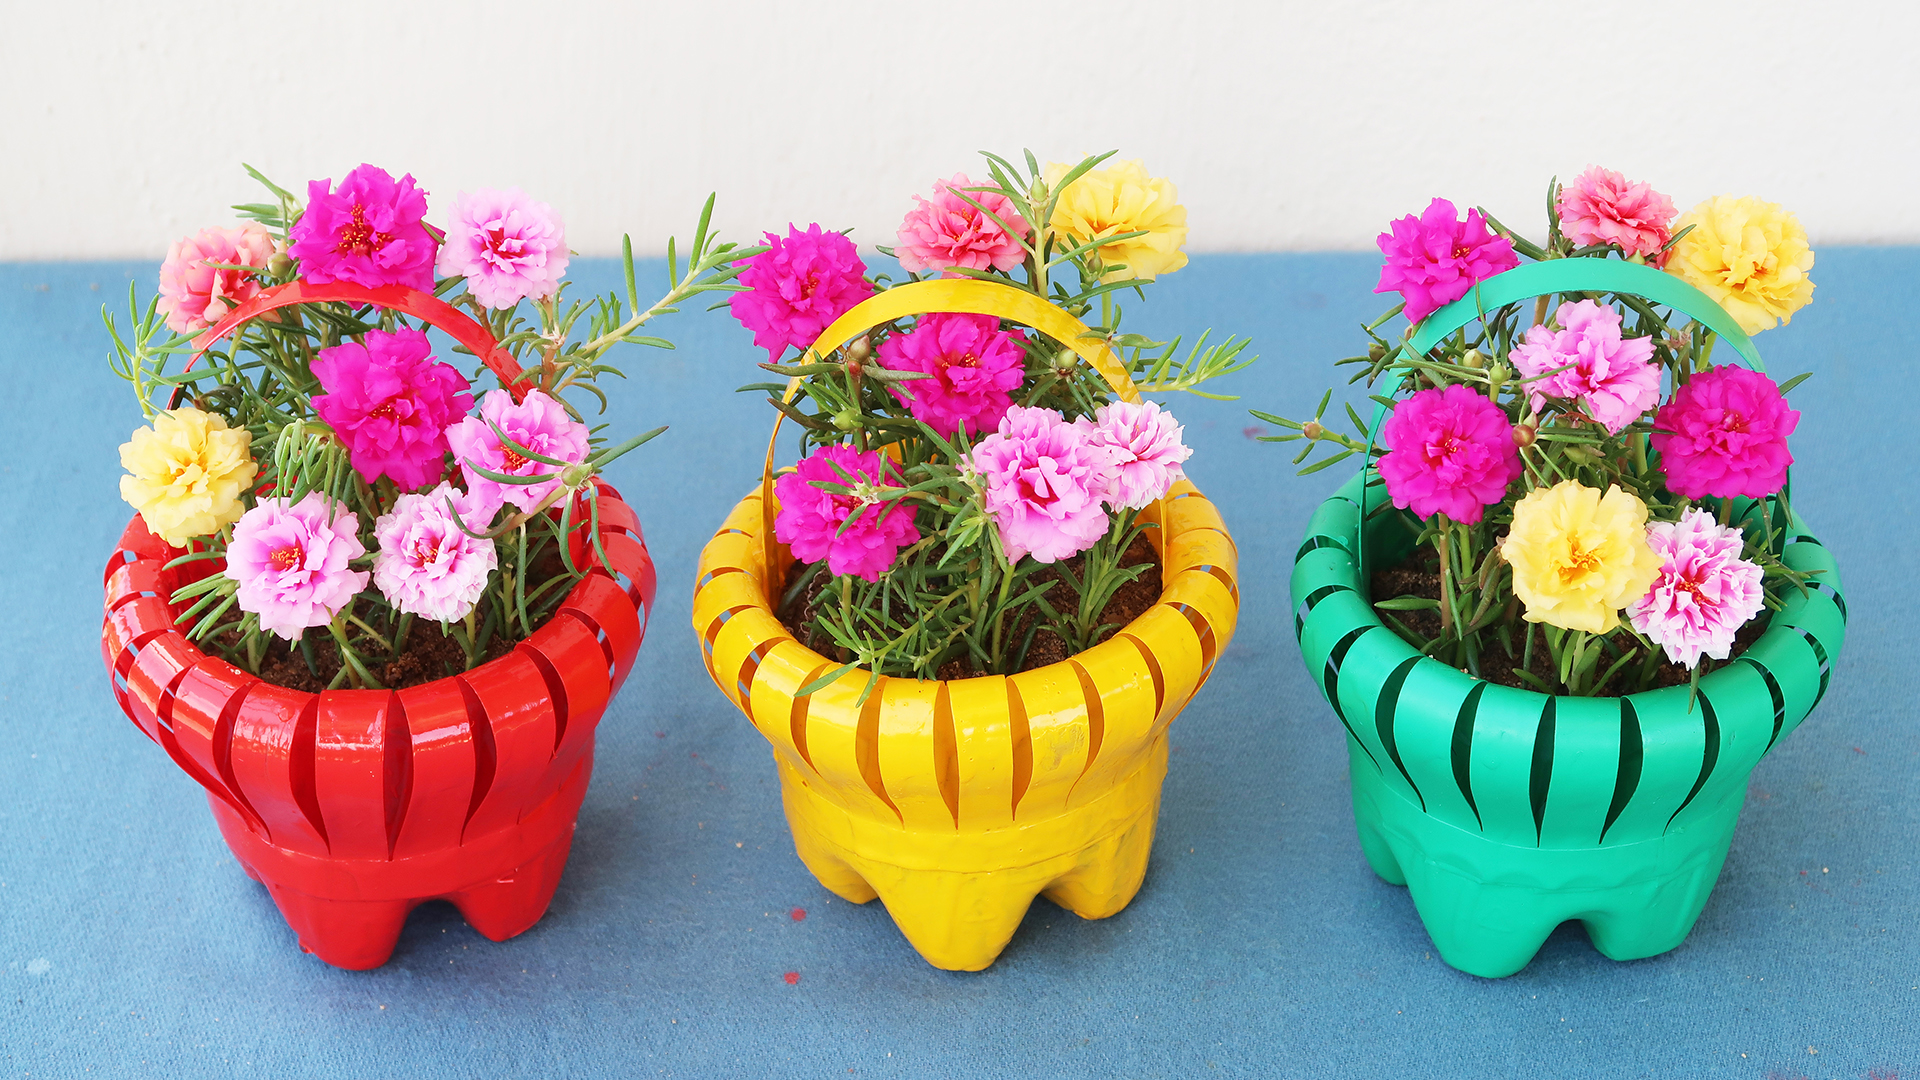 Recycle Plastic Bottles To Make Beautiful Flower Baskets To Grow Portulaca (Moss Rose)